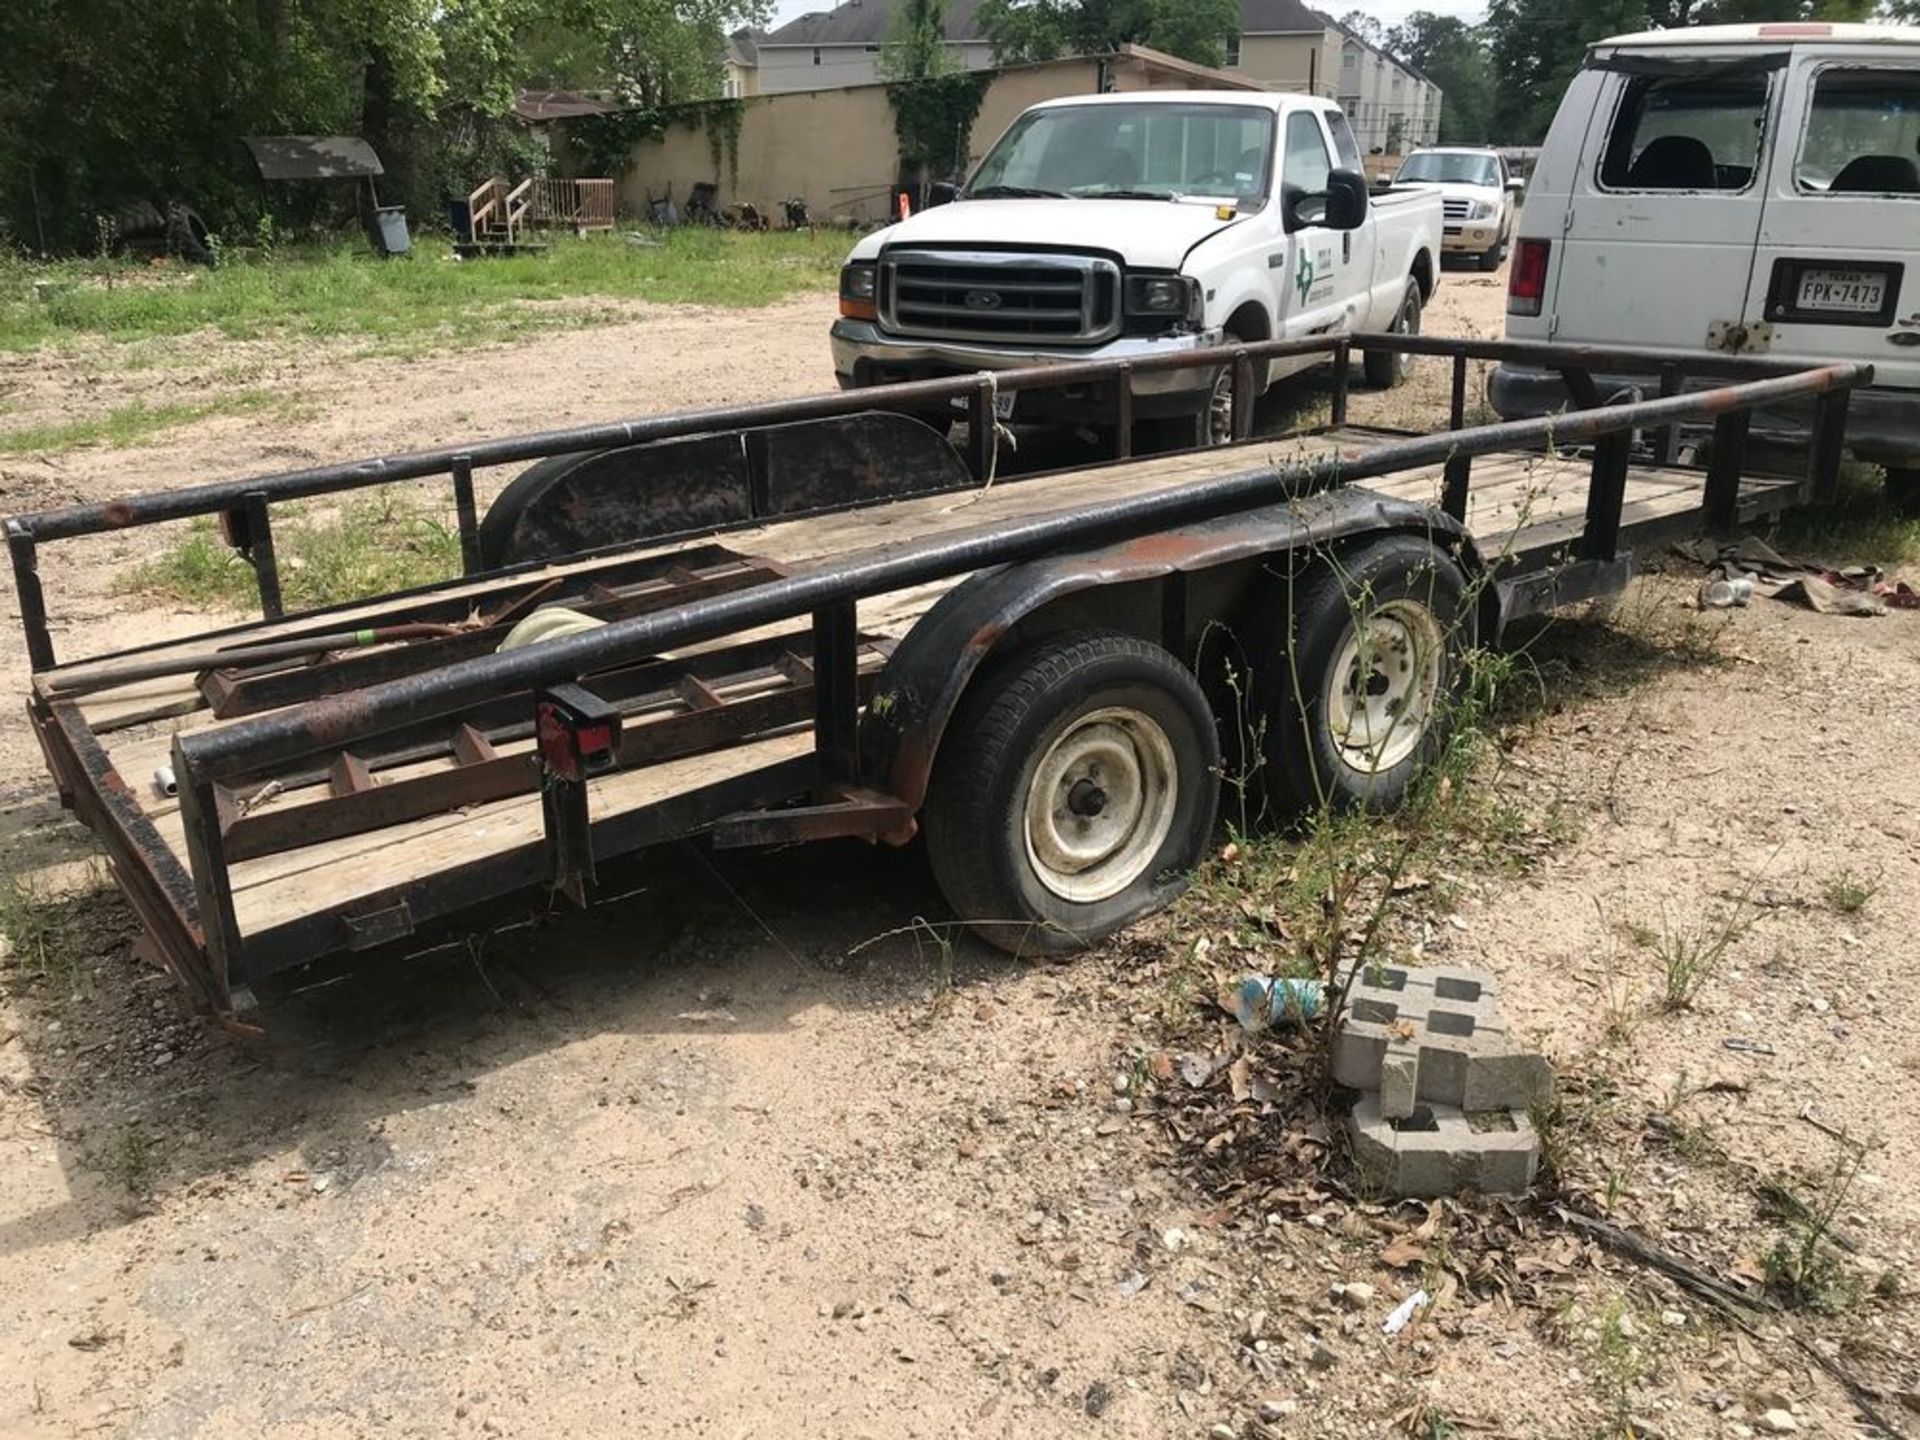 7'W x 16'L T/A Utility Trailer w/ Loading Ramps, 4500 GVWR, Bumper Pull Hitch - Image 3 of 5